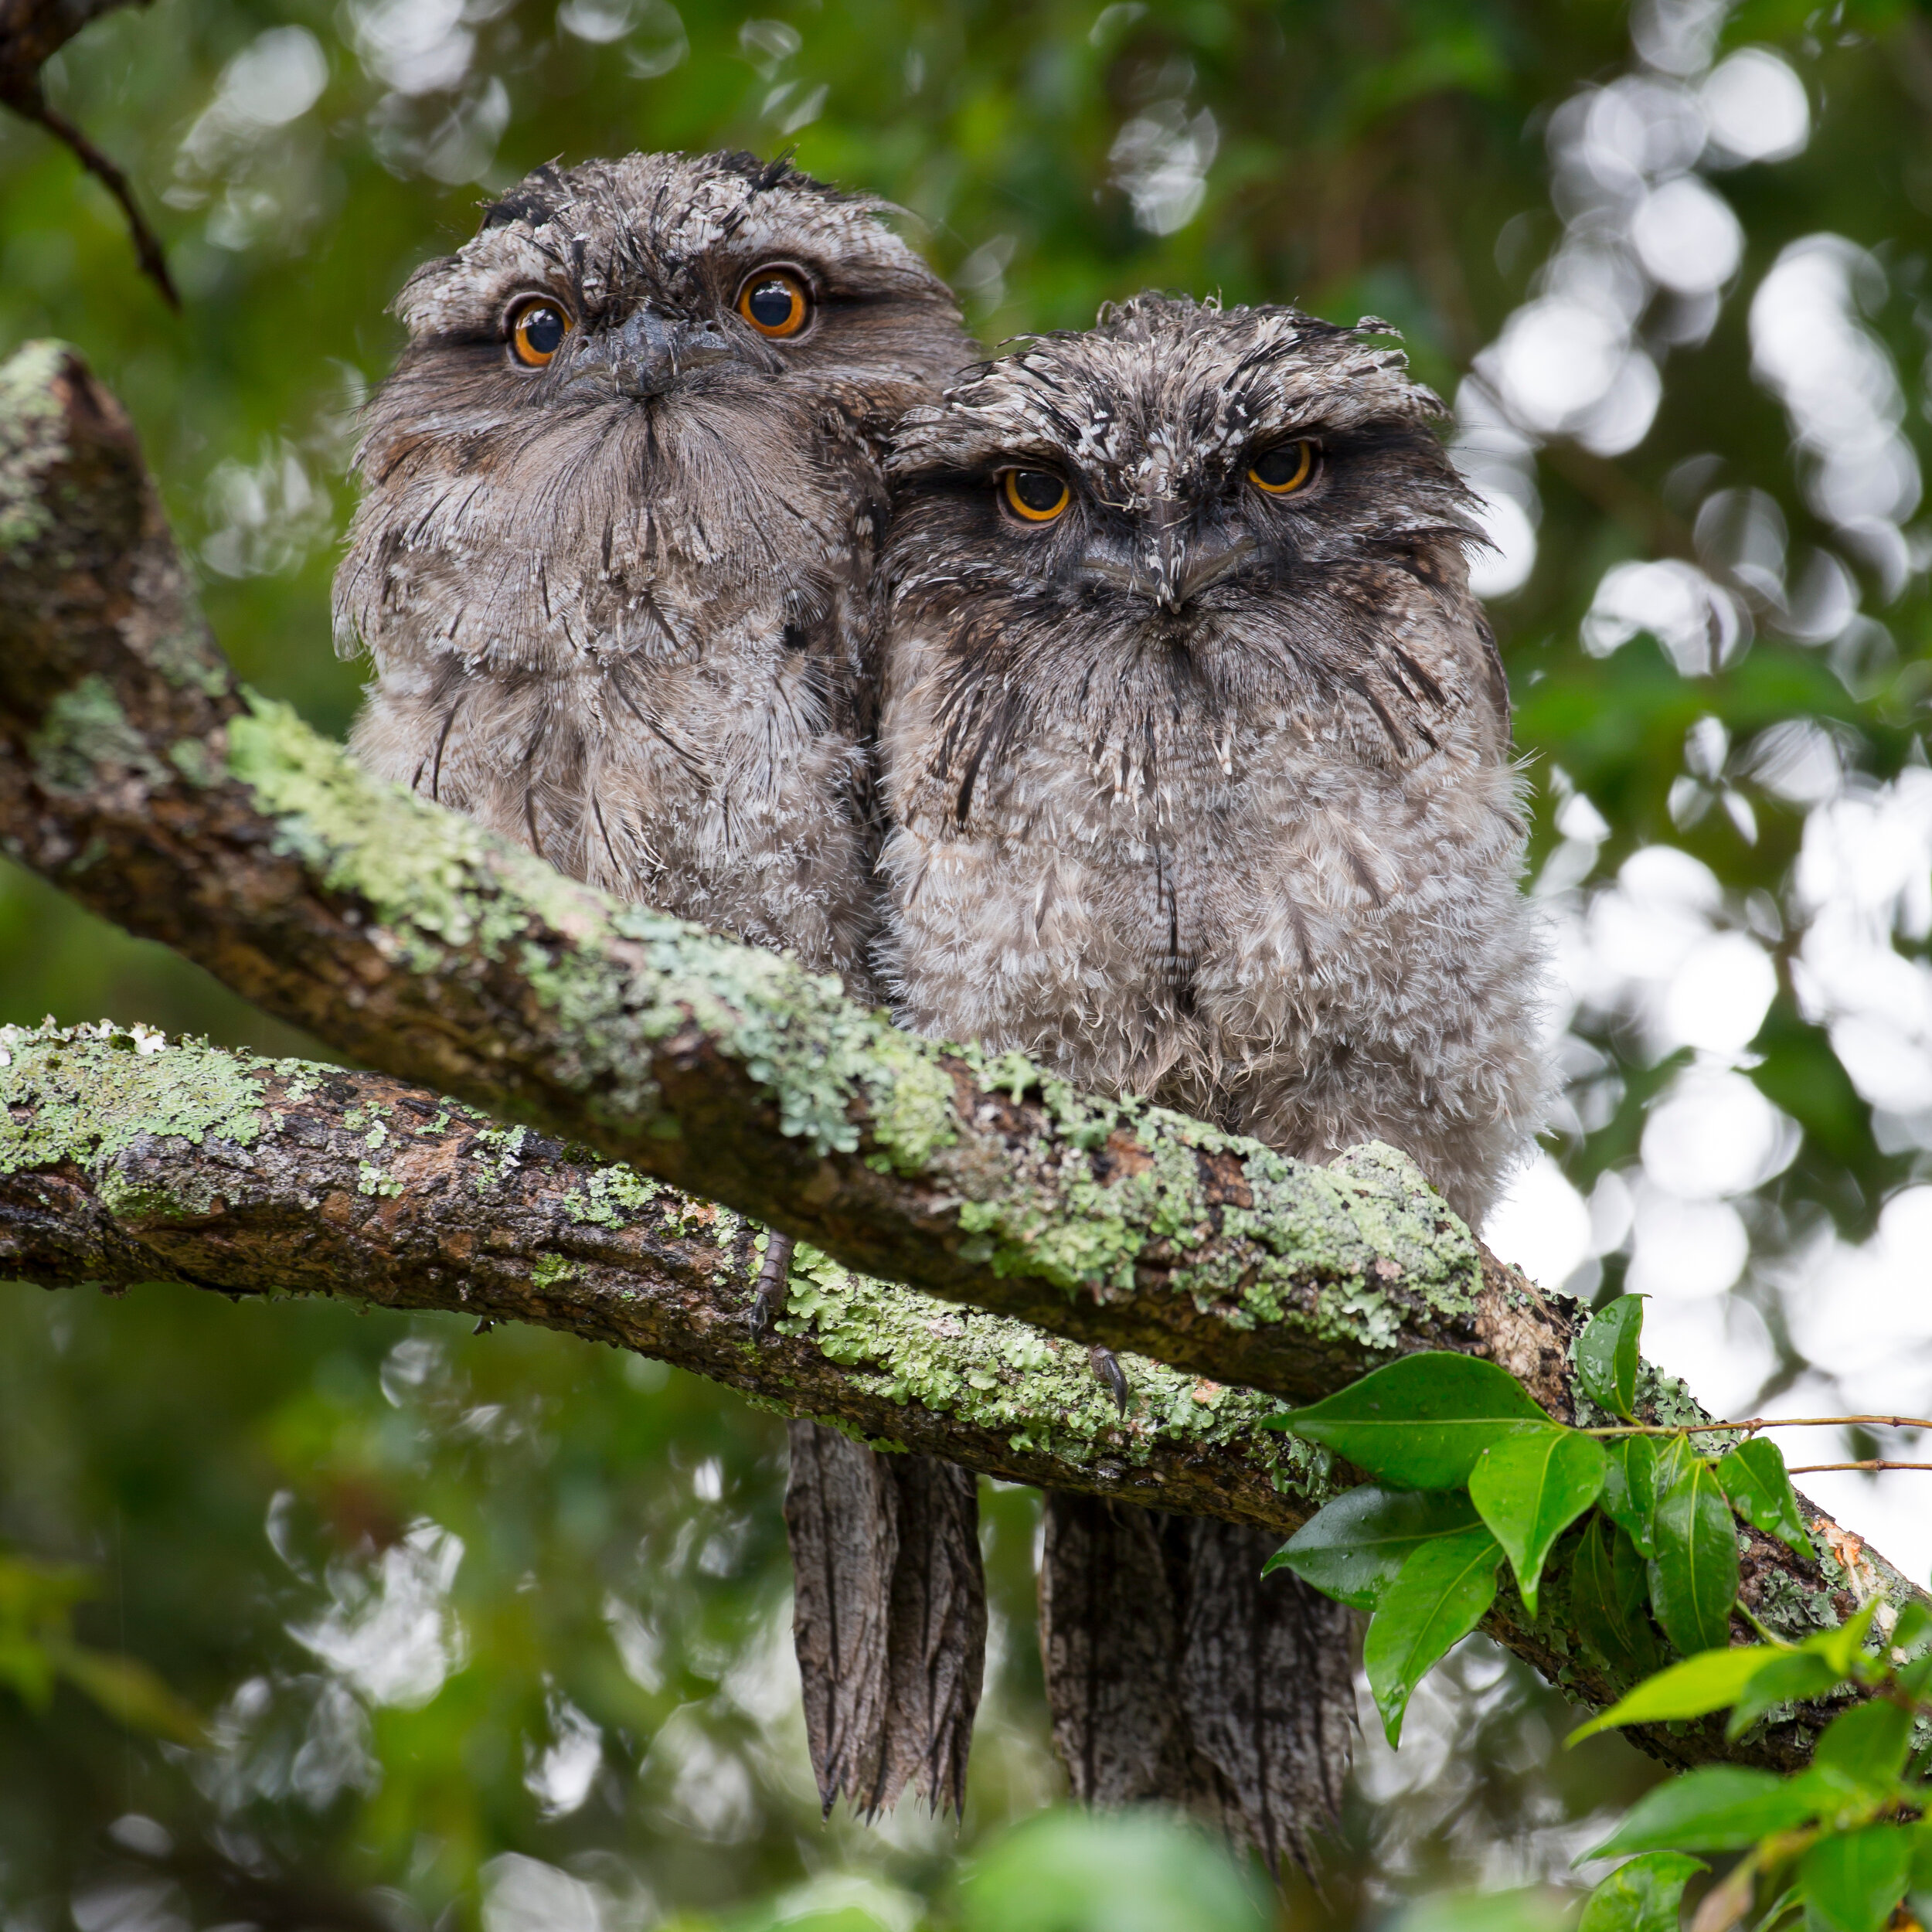 Canva - 2 Owls on Tree Branch during Daytime.jpg